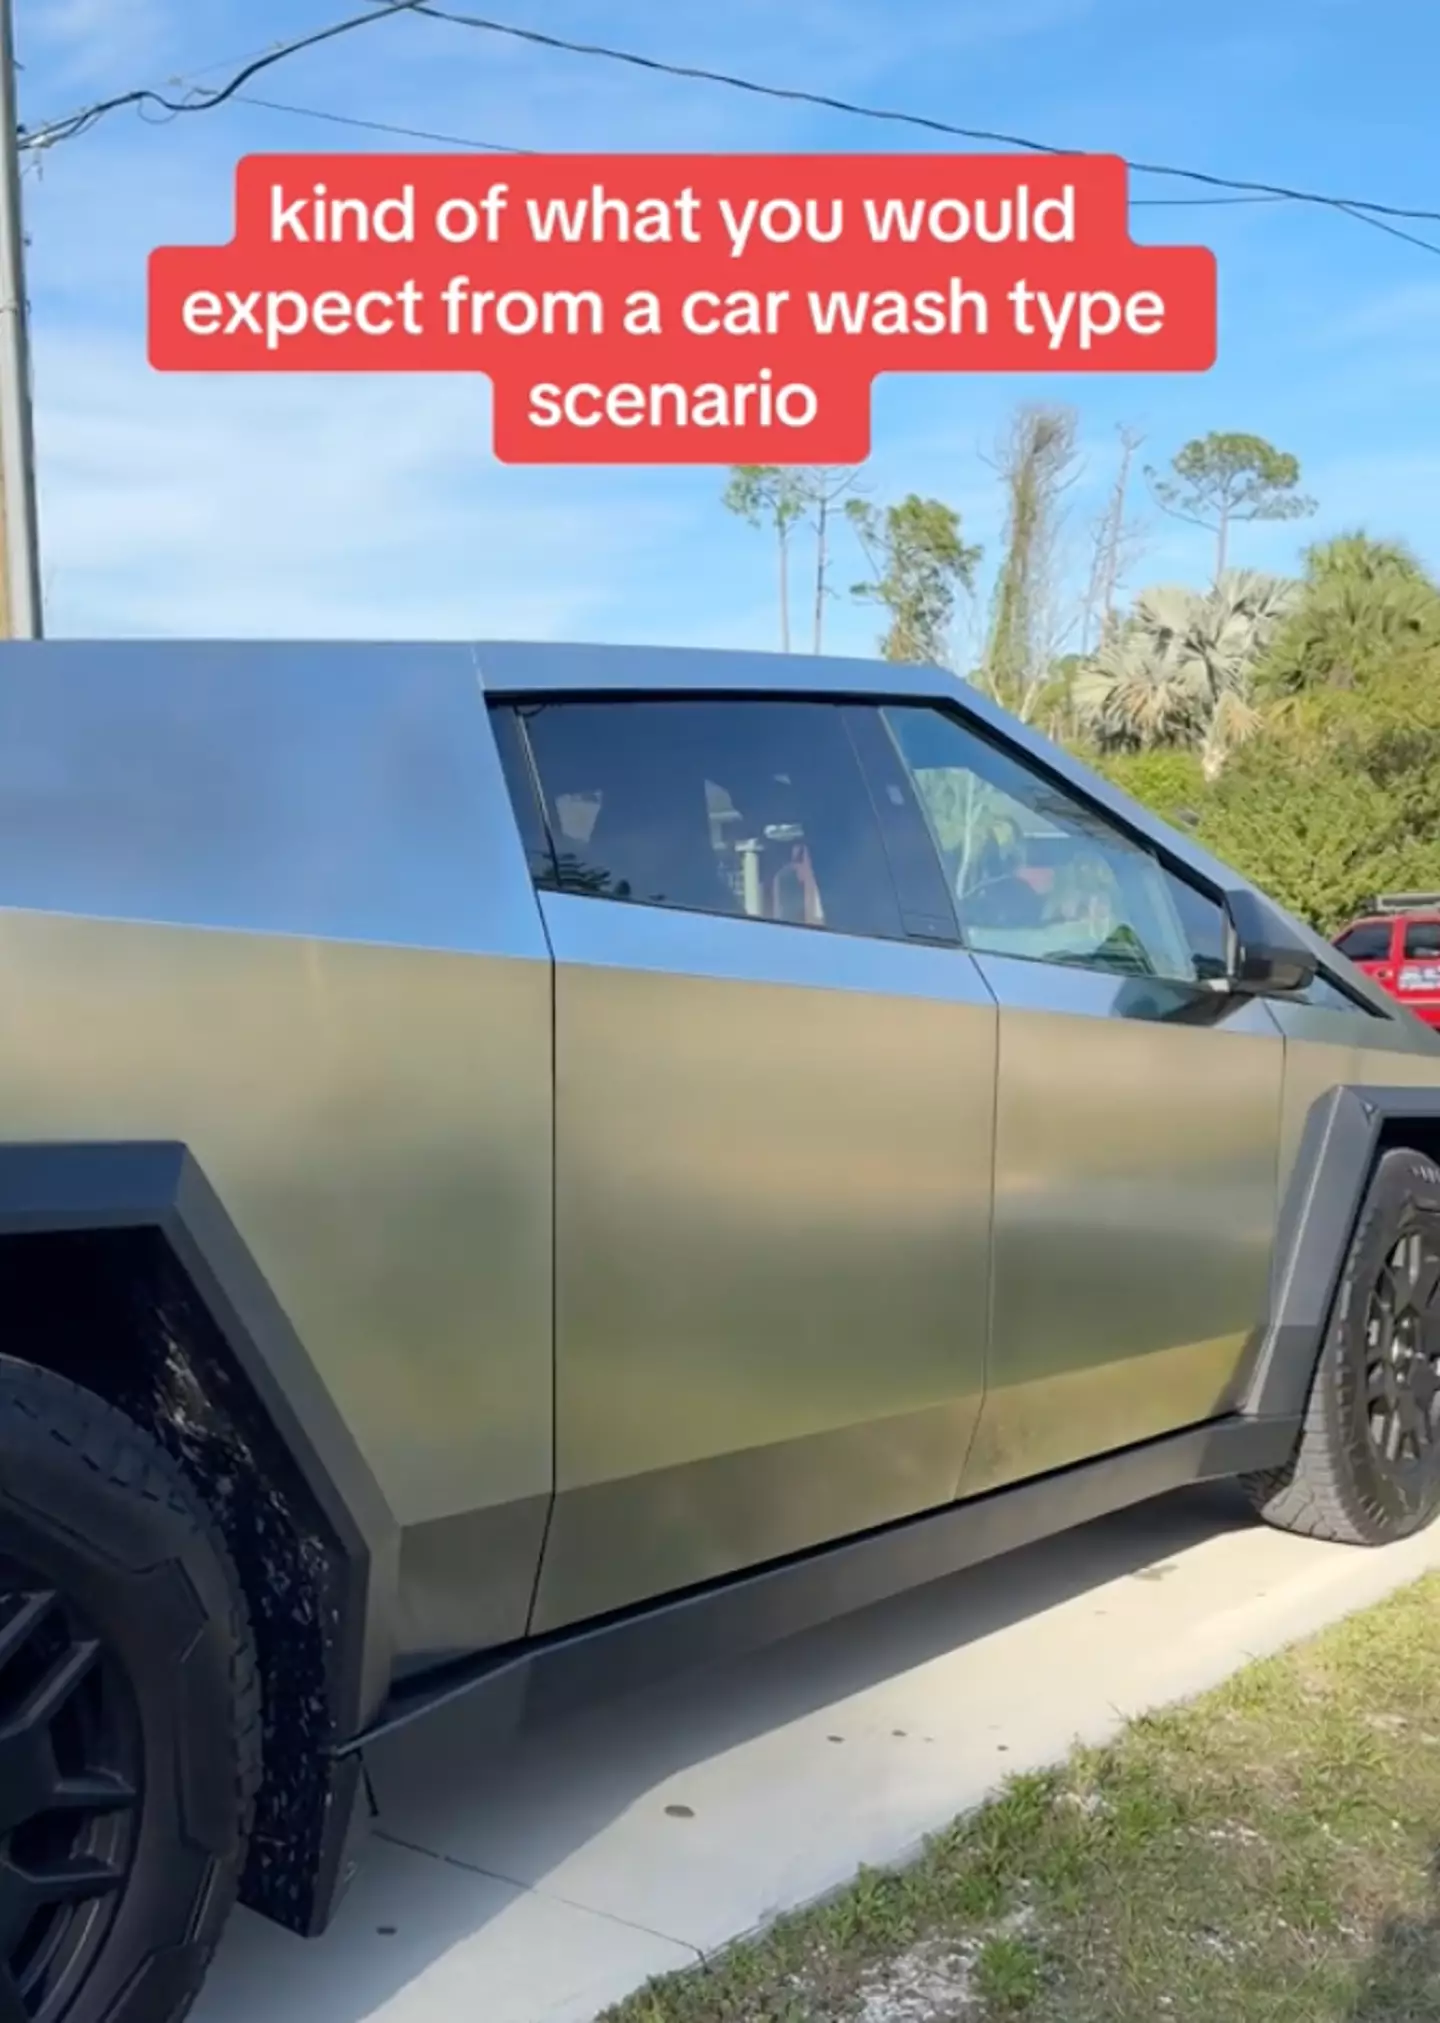 The car looked scratch-free after the wash. (Tiktok/jeremyjudkins2)